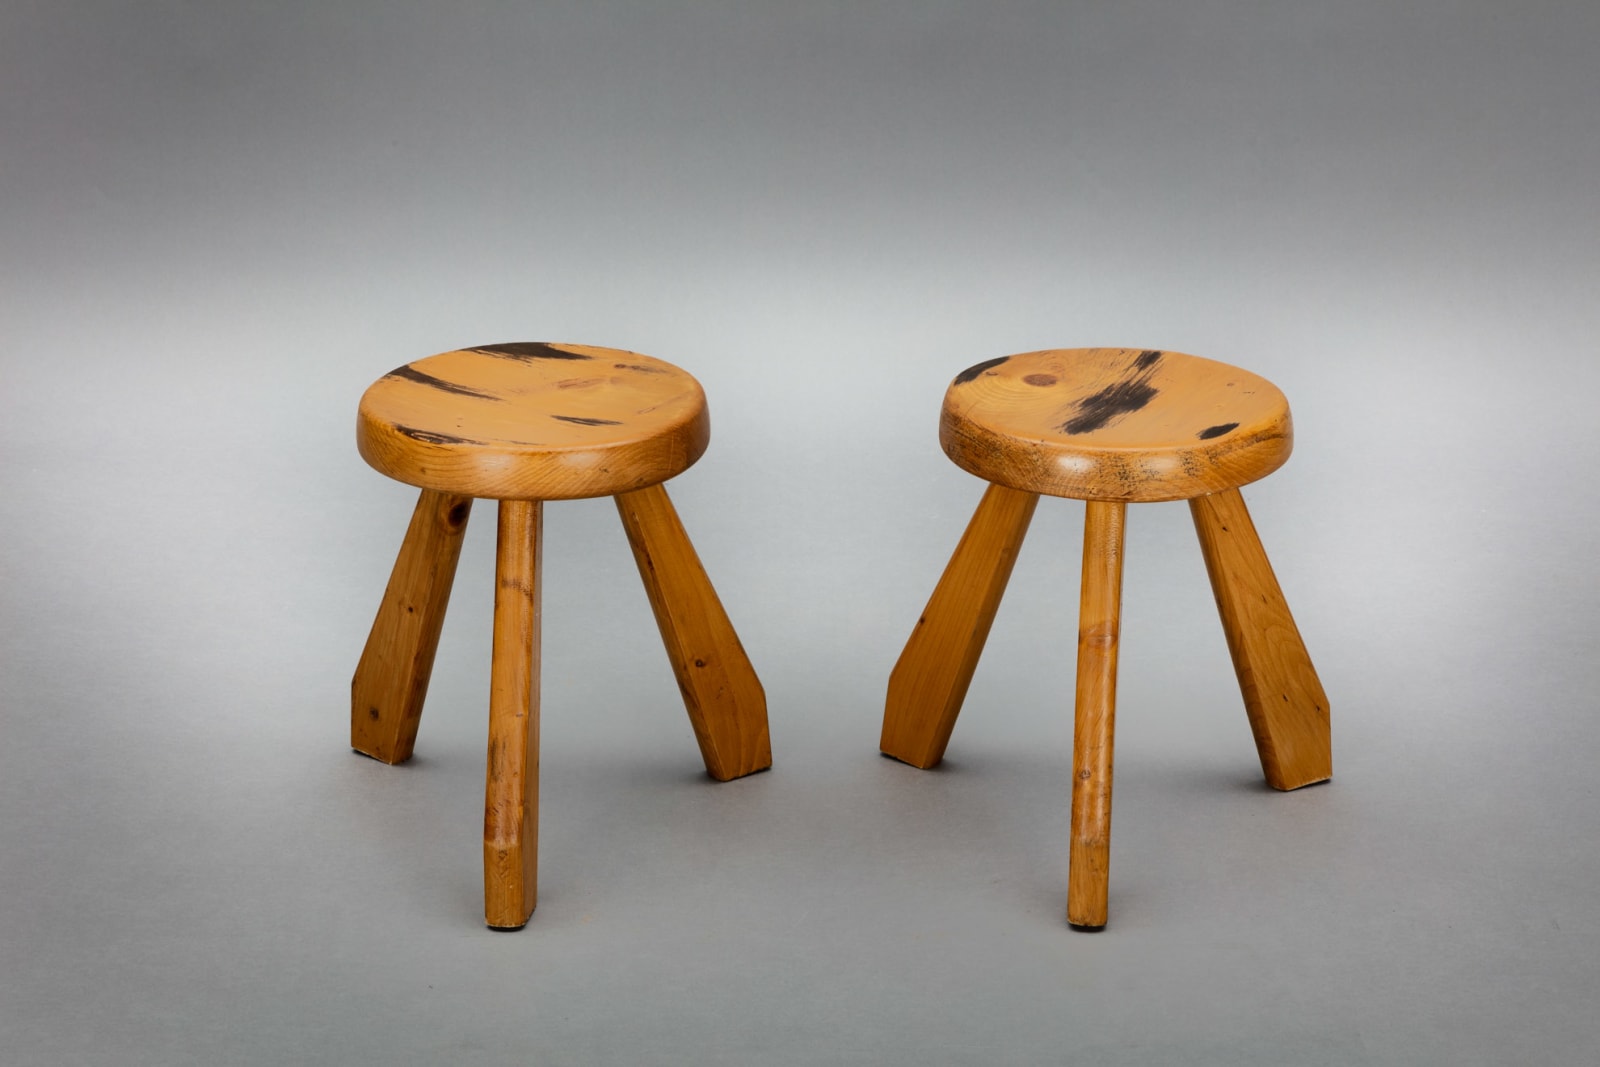 Charlotte Perriand, Pair of Stools from Les Arcs, France, 1962 